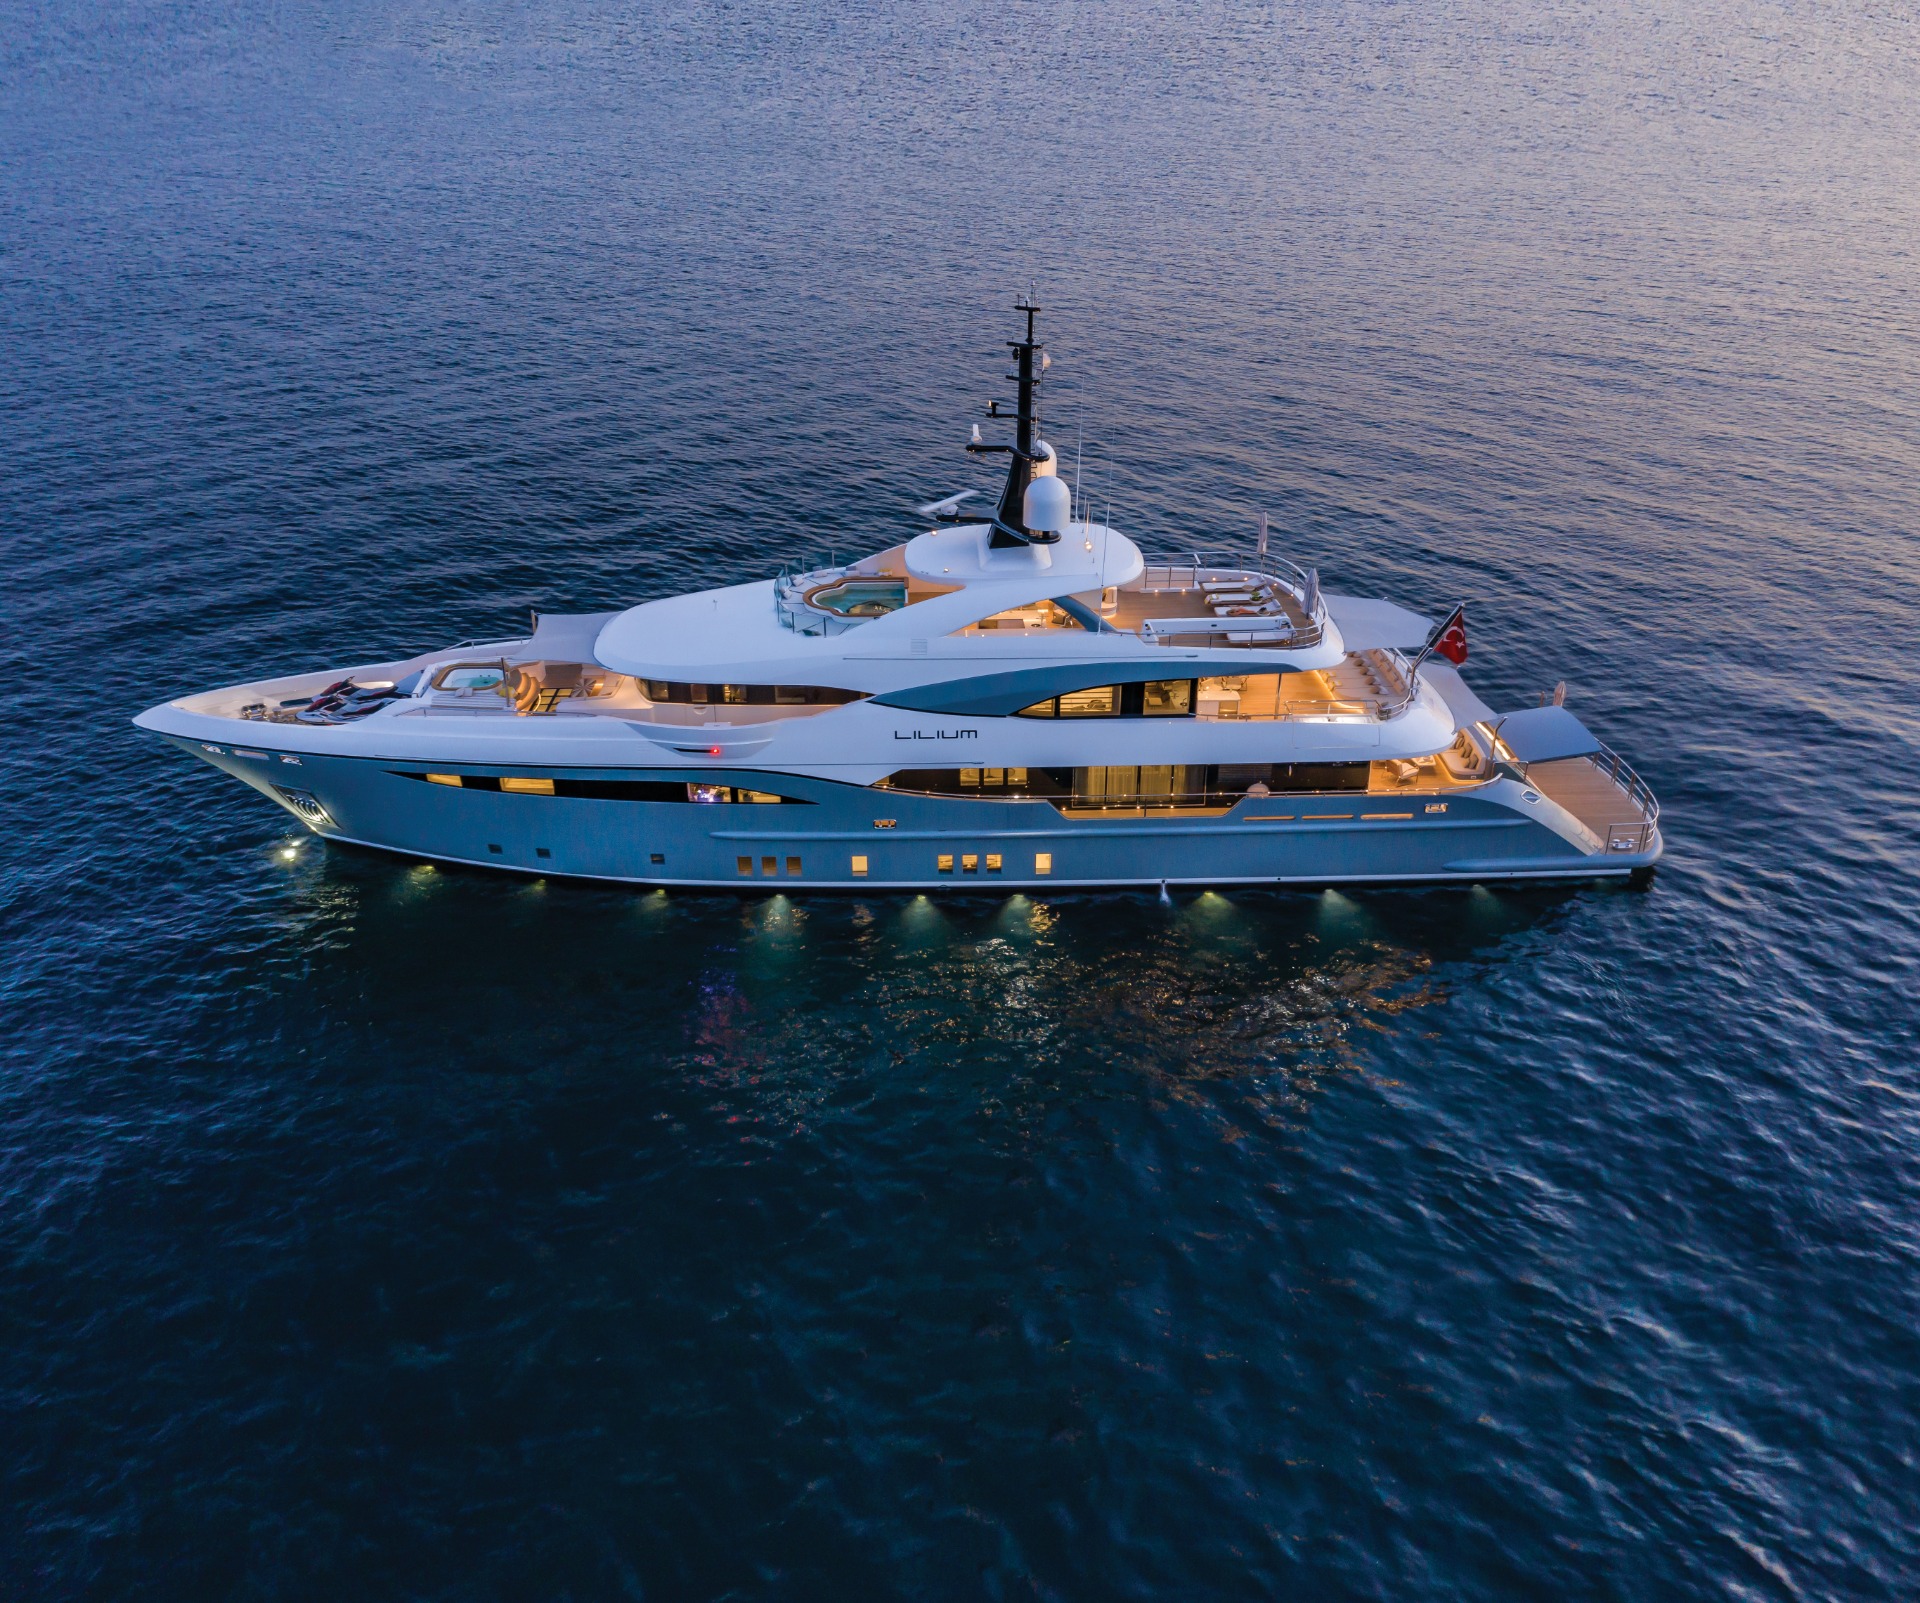 Monaco Yacht Show Highlights! A Grand and Luxurious Yacht Design